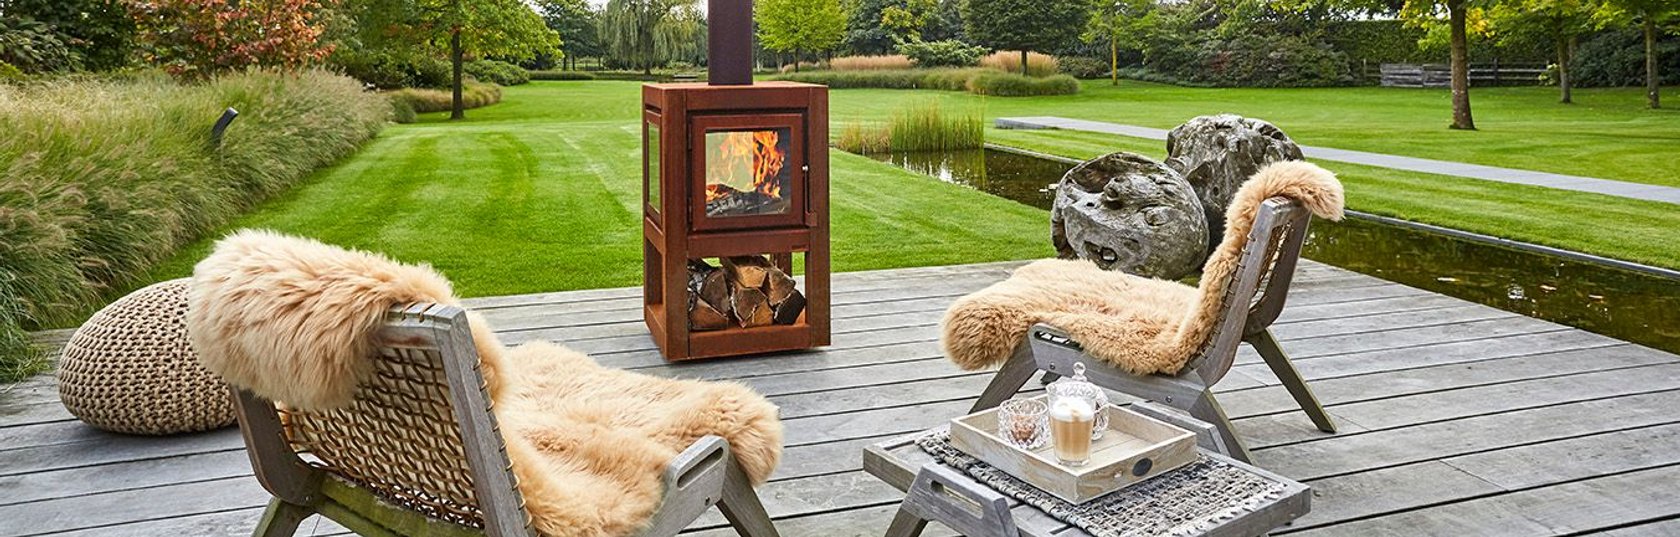 Choosing the best outdoor heating for your home